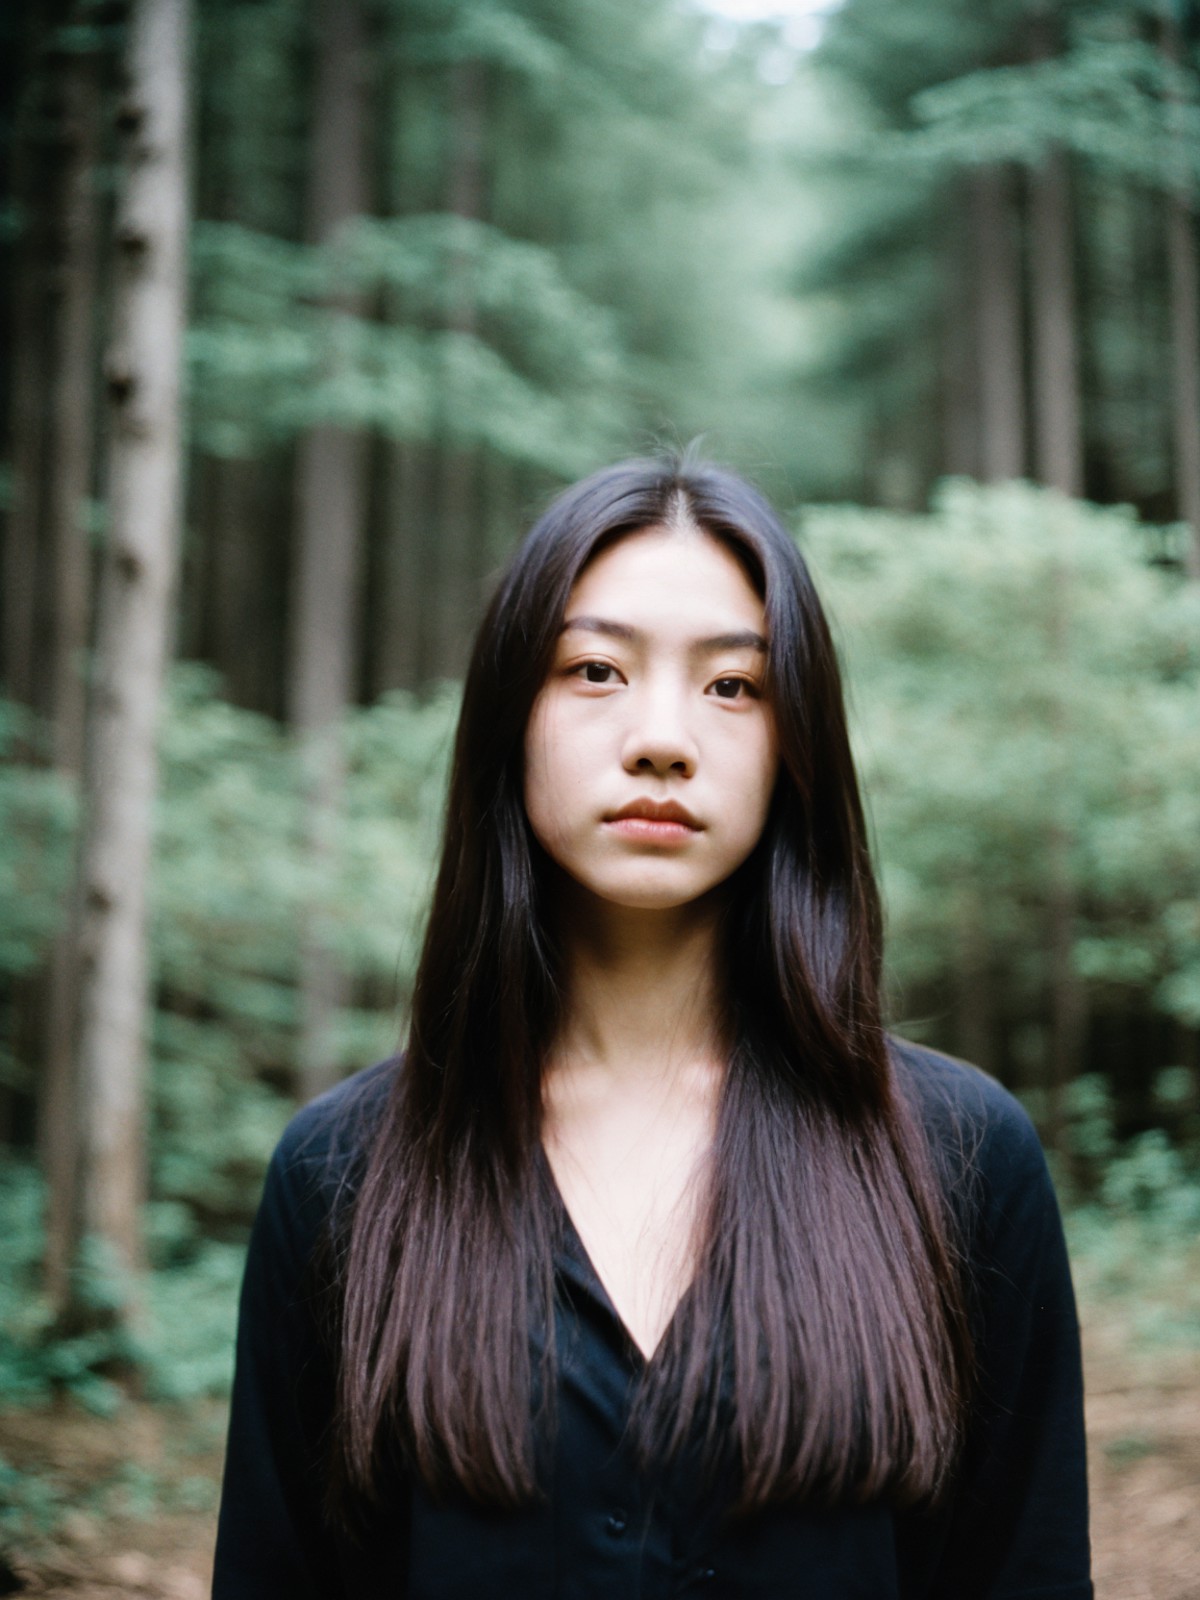 film grain analog photography,close -, asian female, serene expression, forest backdrop, bokeh effect, natural light, shal...